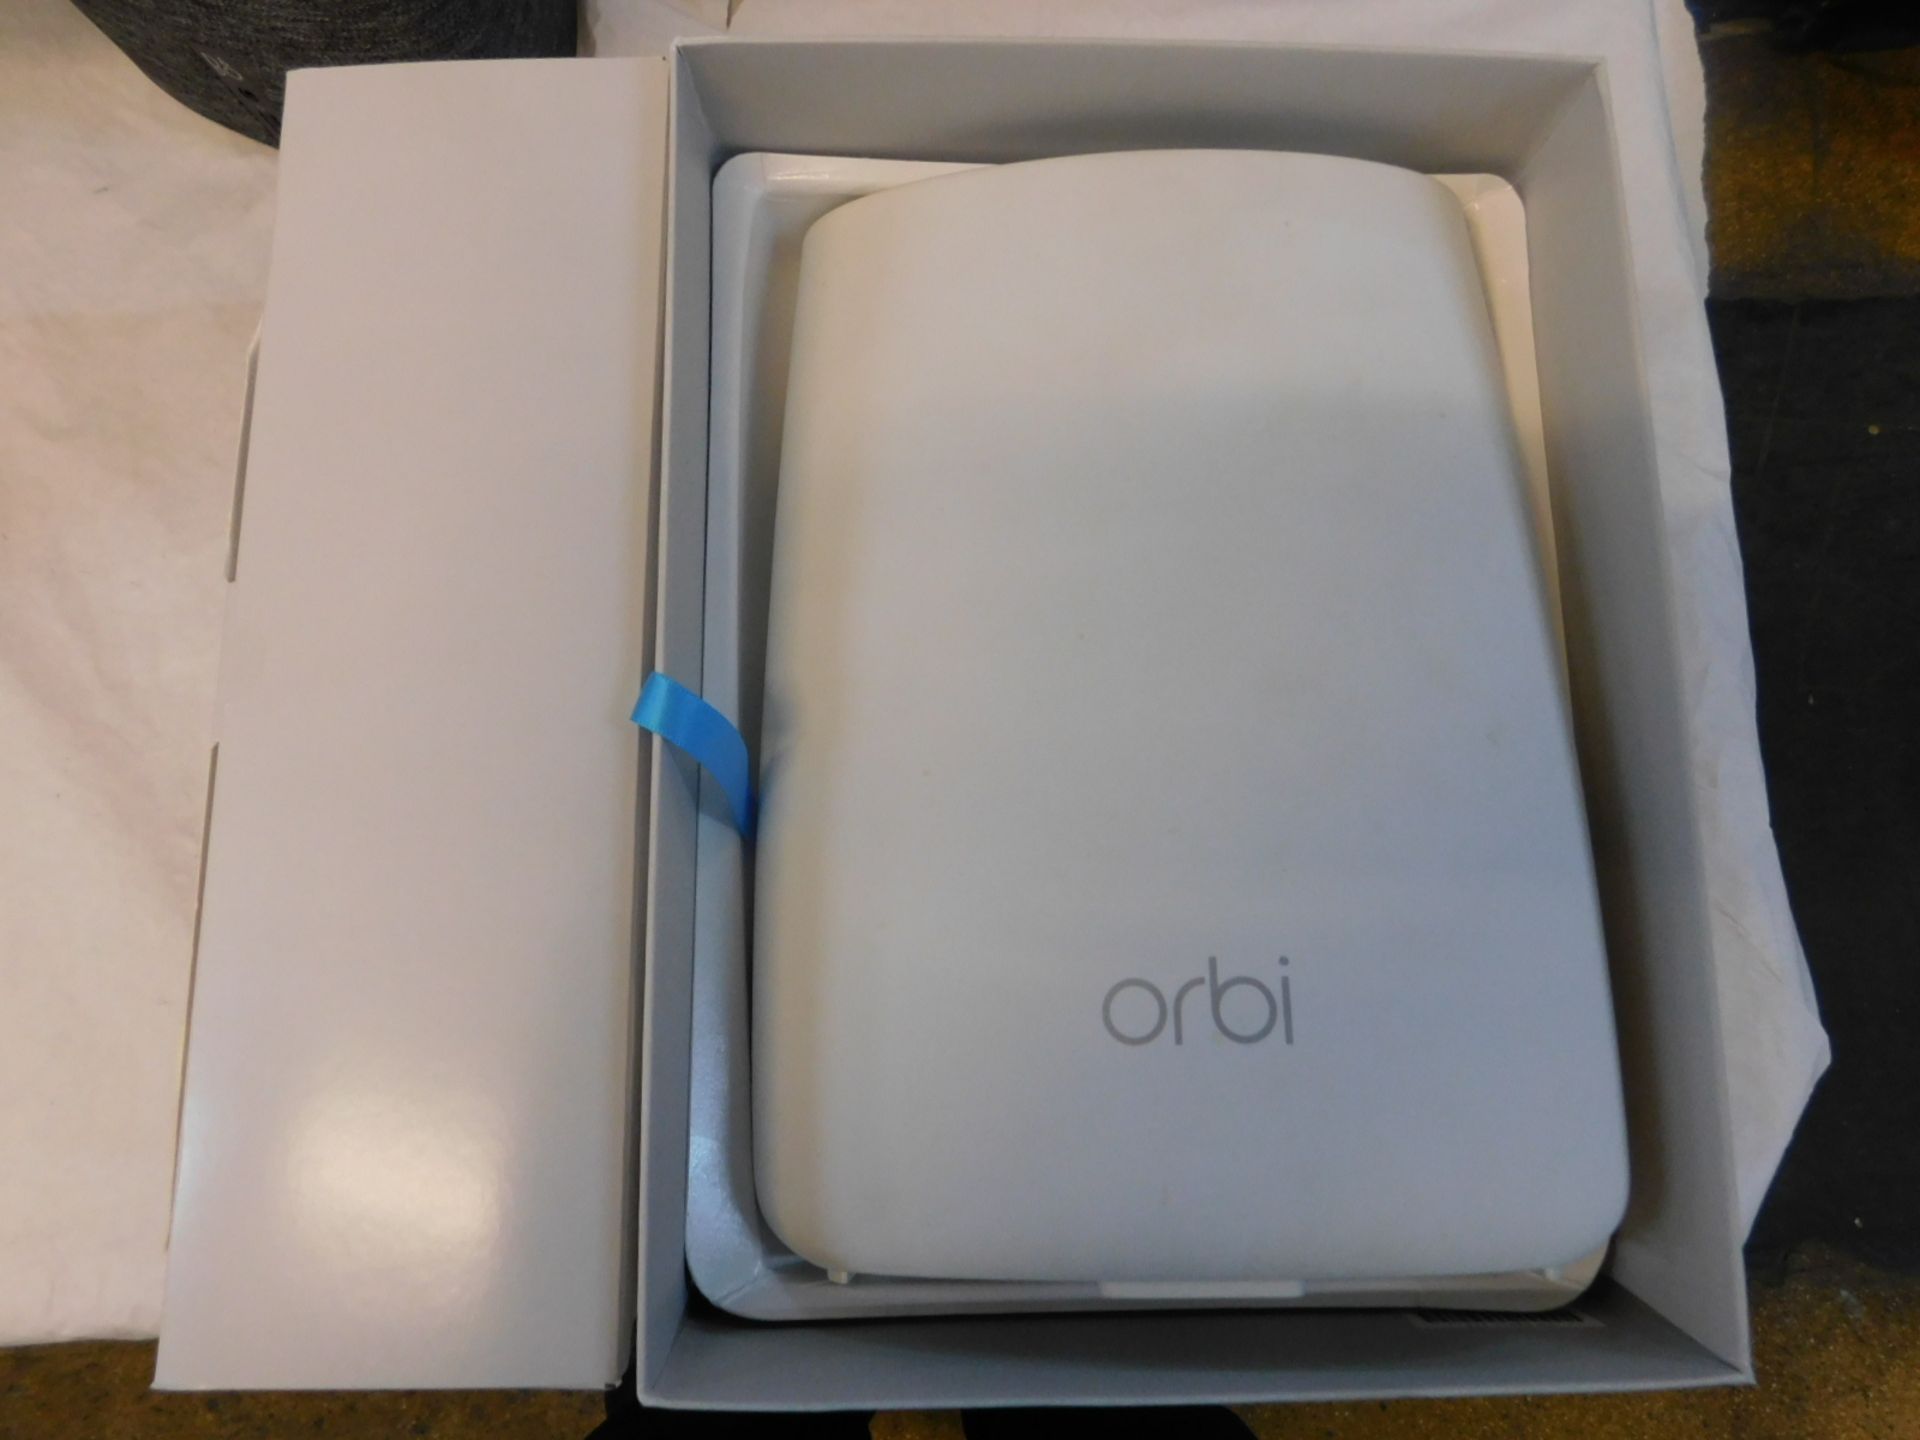 1 BOXED NETGEAR ORBI WHOLE HOME WIFI SYSTEM MODEL AC3000 COVERS UPTO 350 METERS SQUARED RRP Â£349